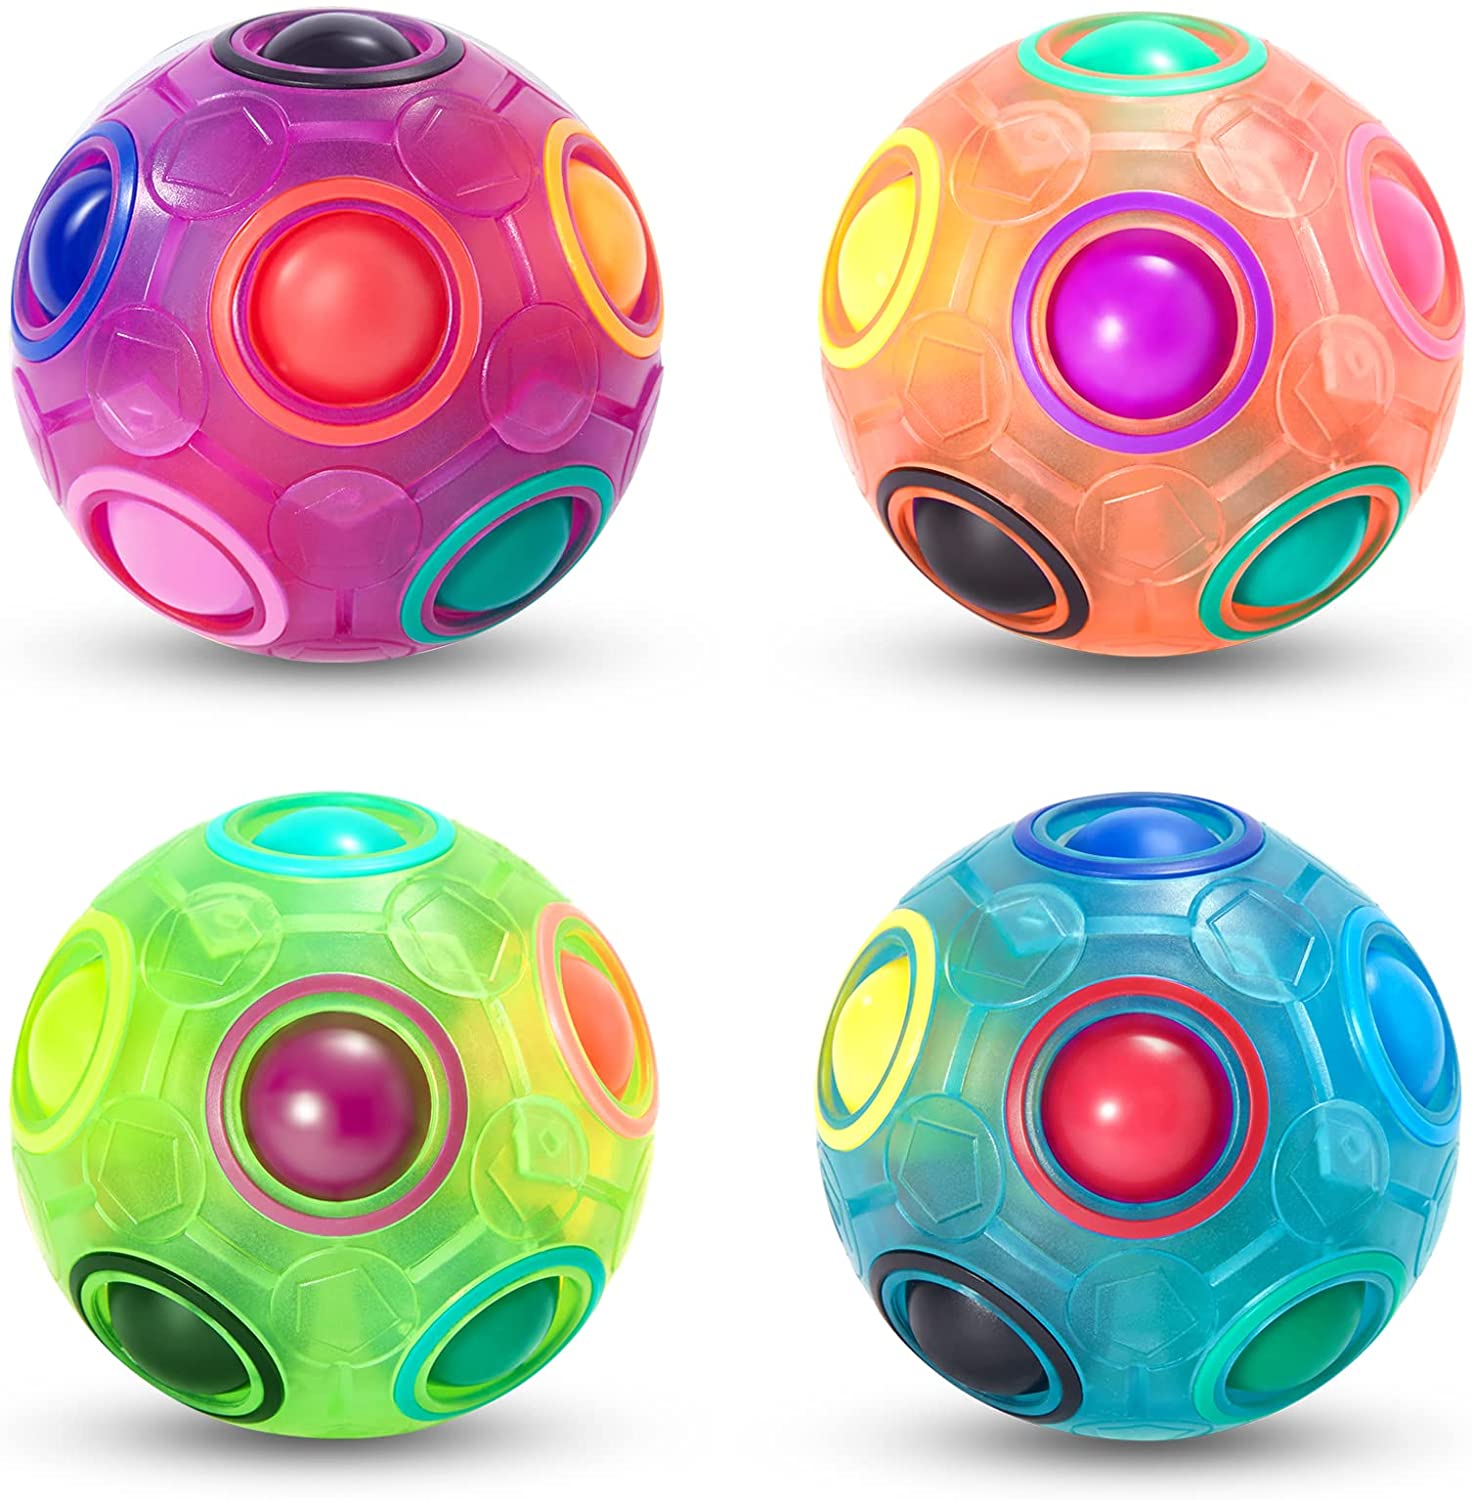 Magic Rainbow Fidget Ball Toy Speed Cube Brain Teaser Stress Relief for All game 